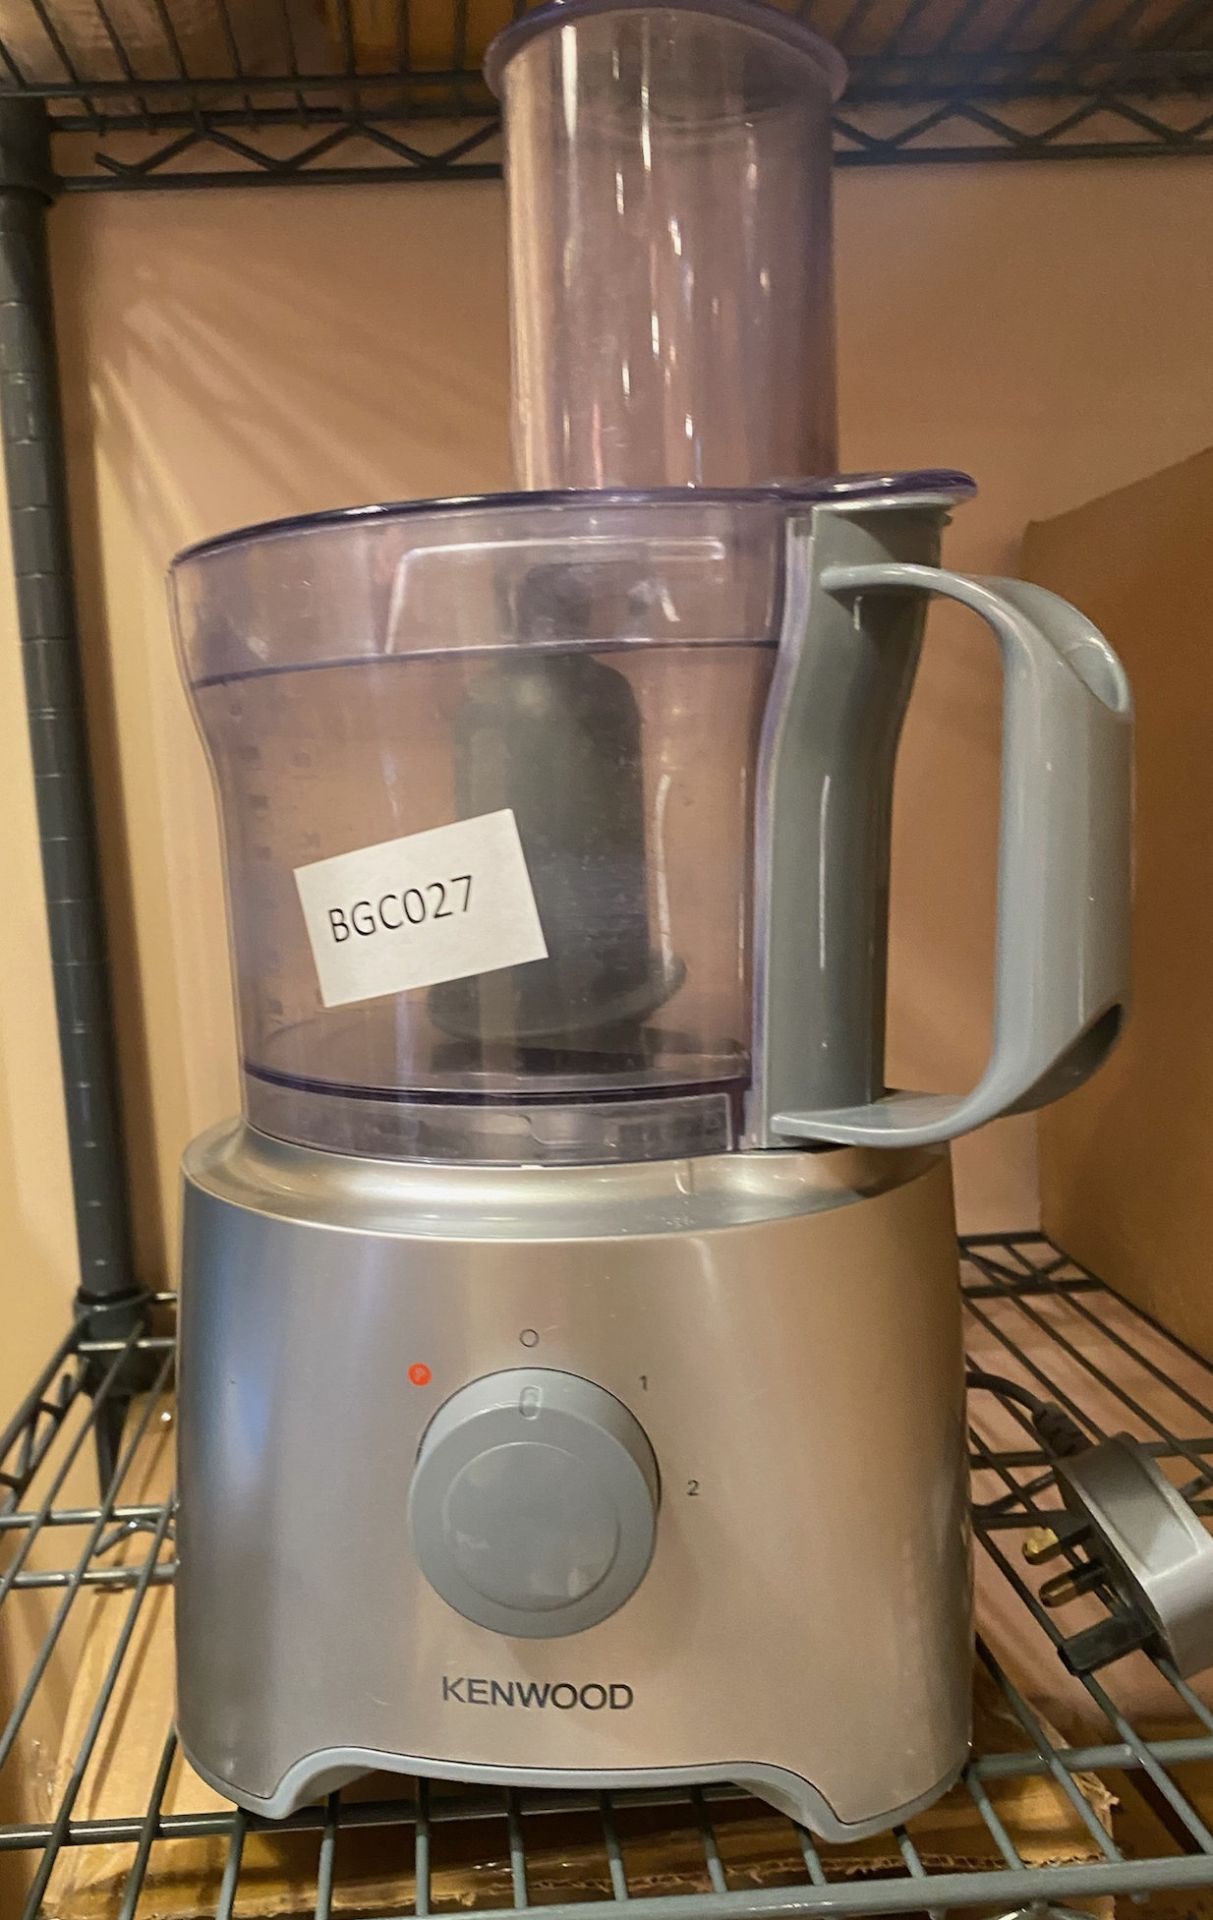 1 x Freestanding Kenwood Mixer - Ref: BGC027 - CL807 - Covent Garden, LondonFrom a recently closed - Image 2 of 2